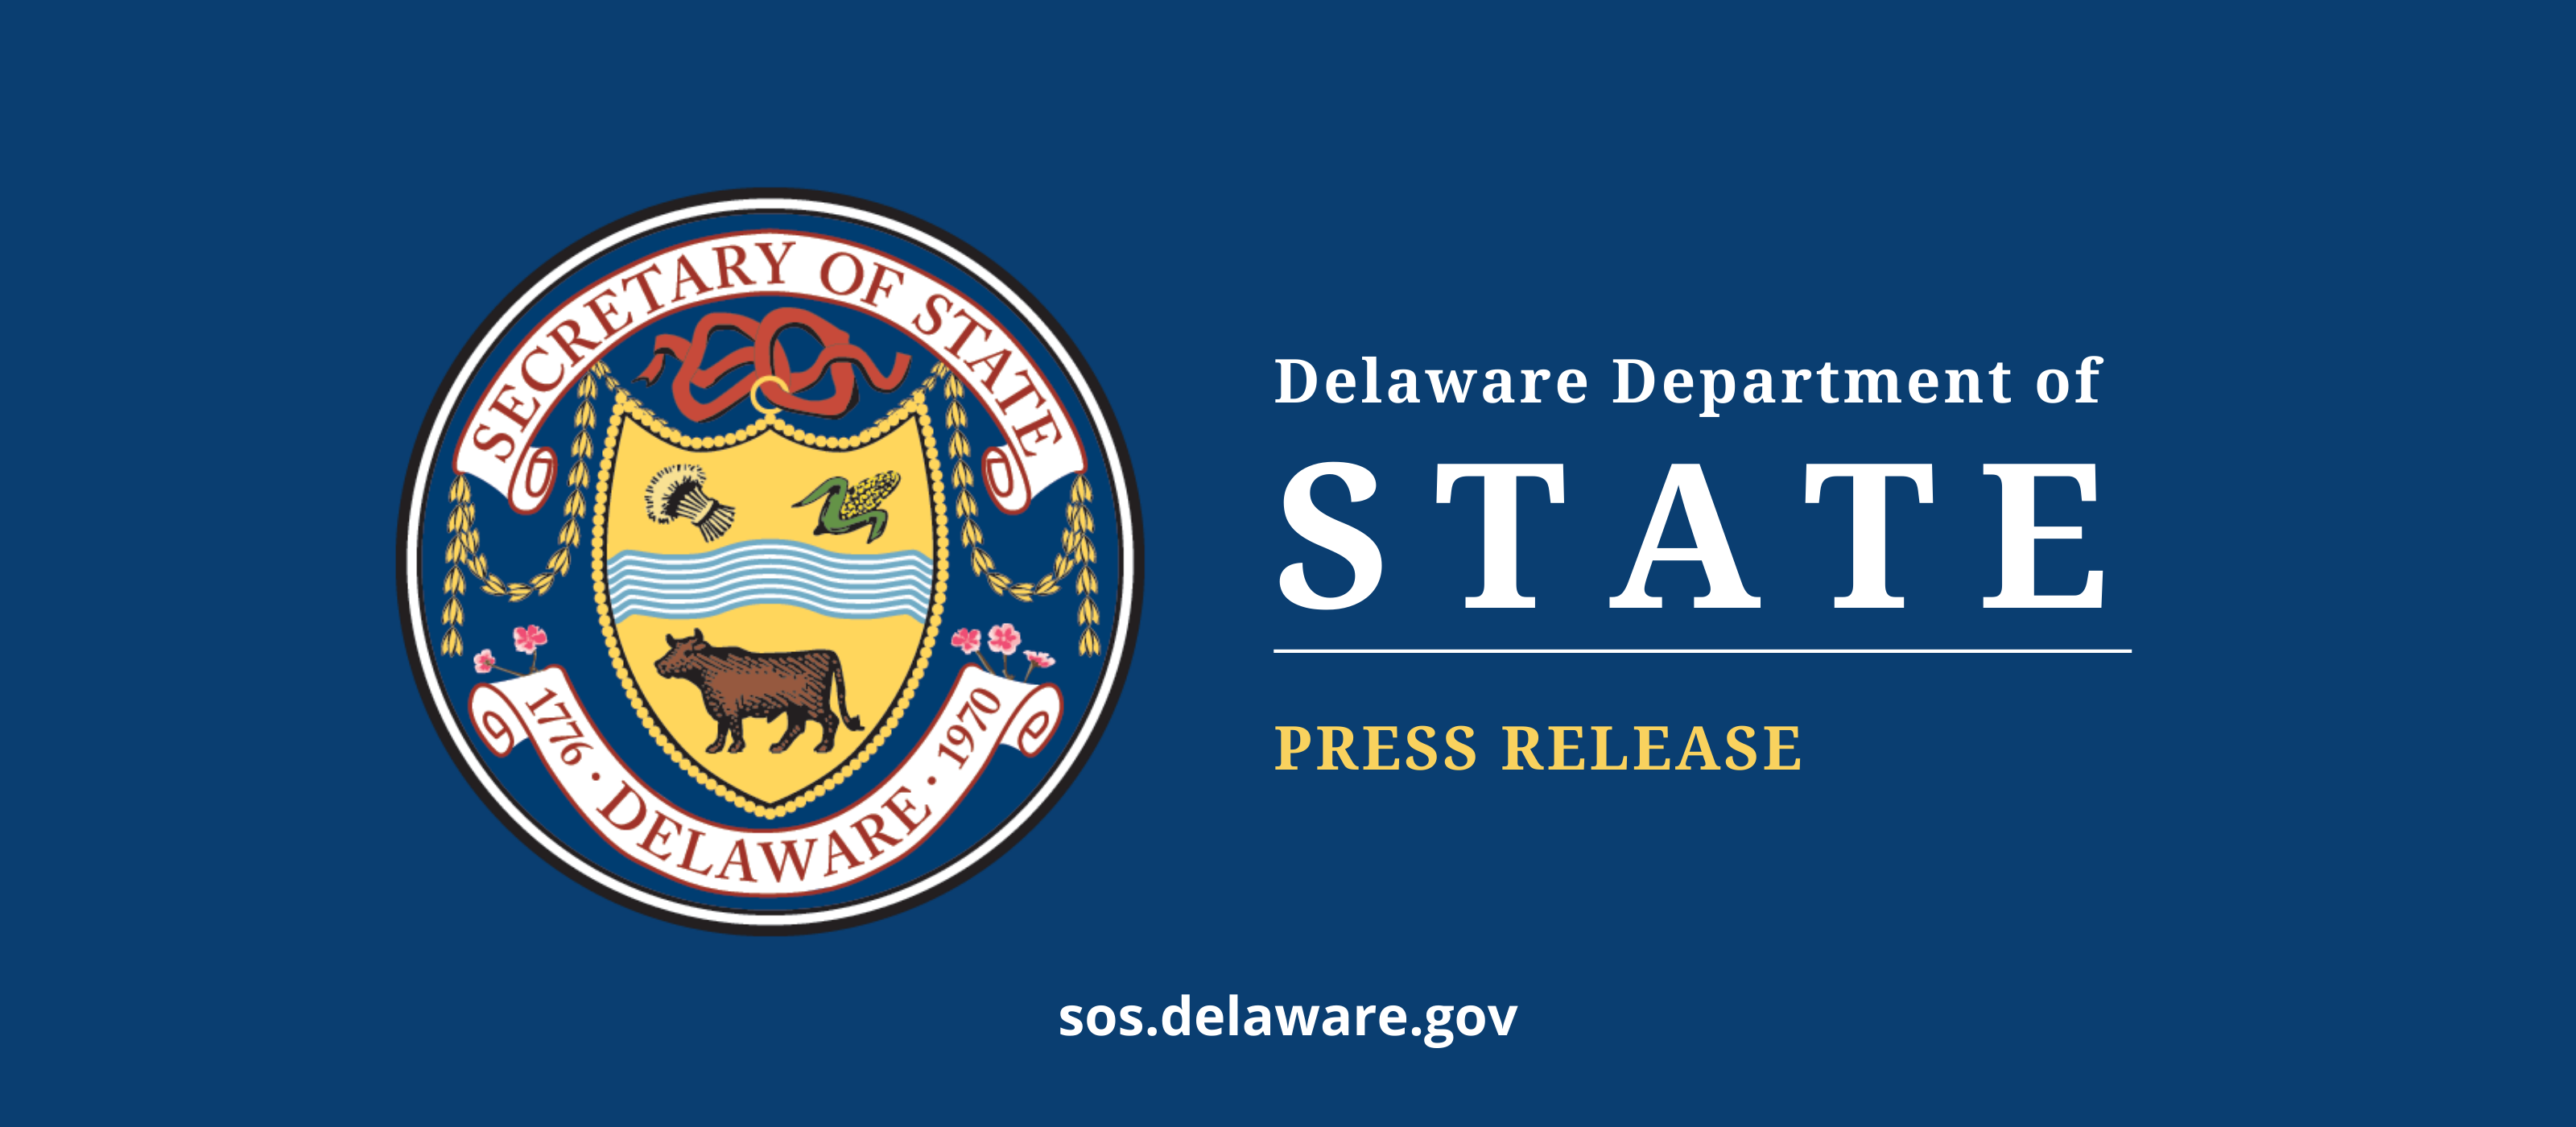 Delaware Department of State Press Release Banner